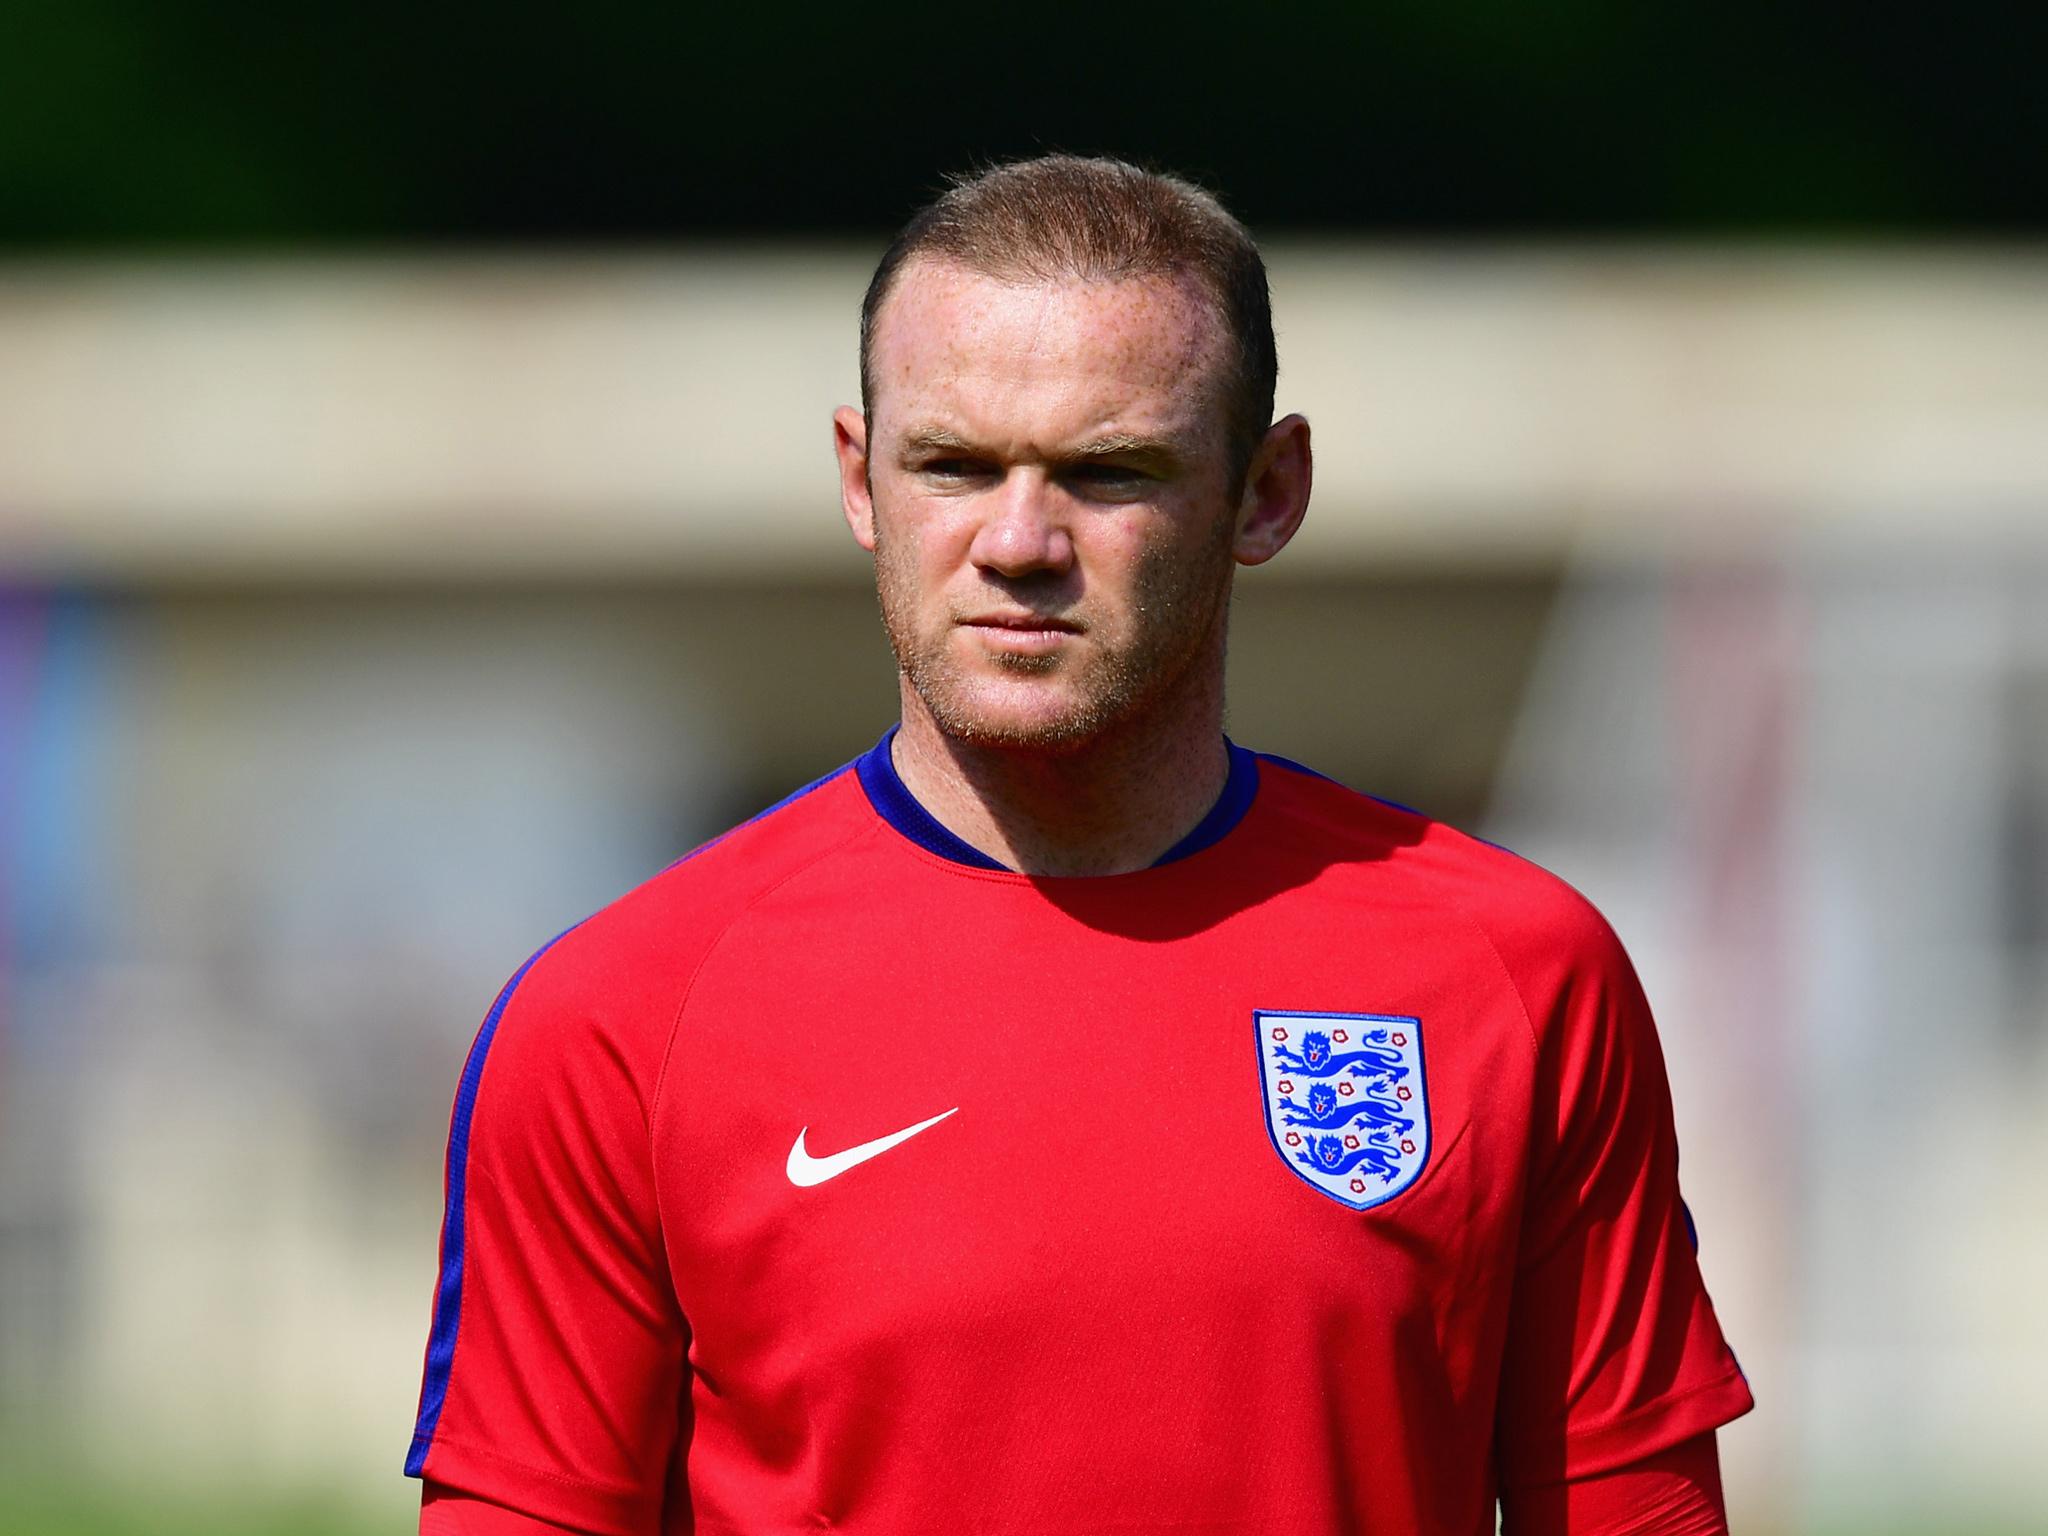 Rooney's place in the side has come under question in recent months